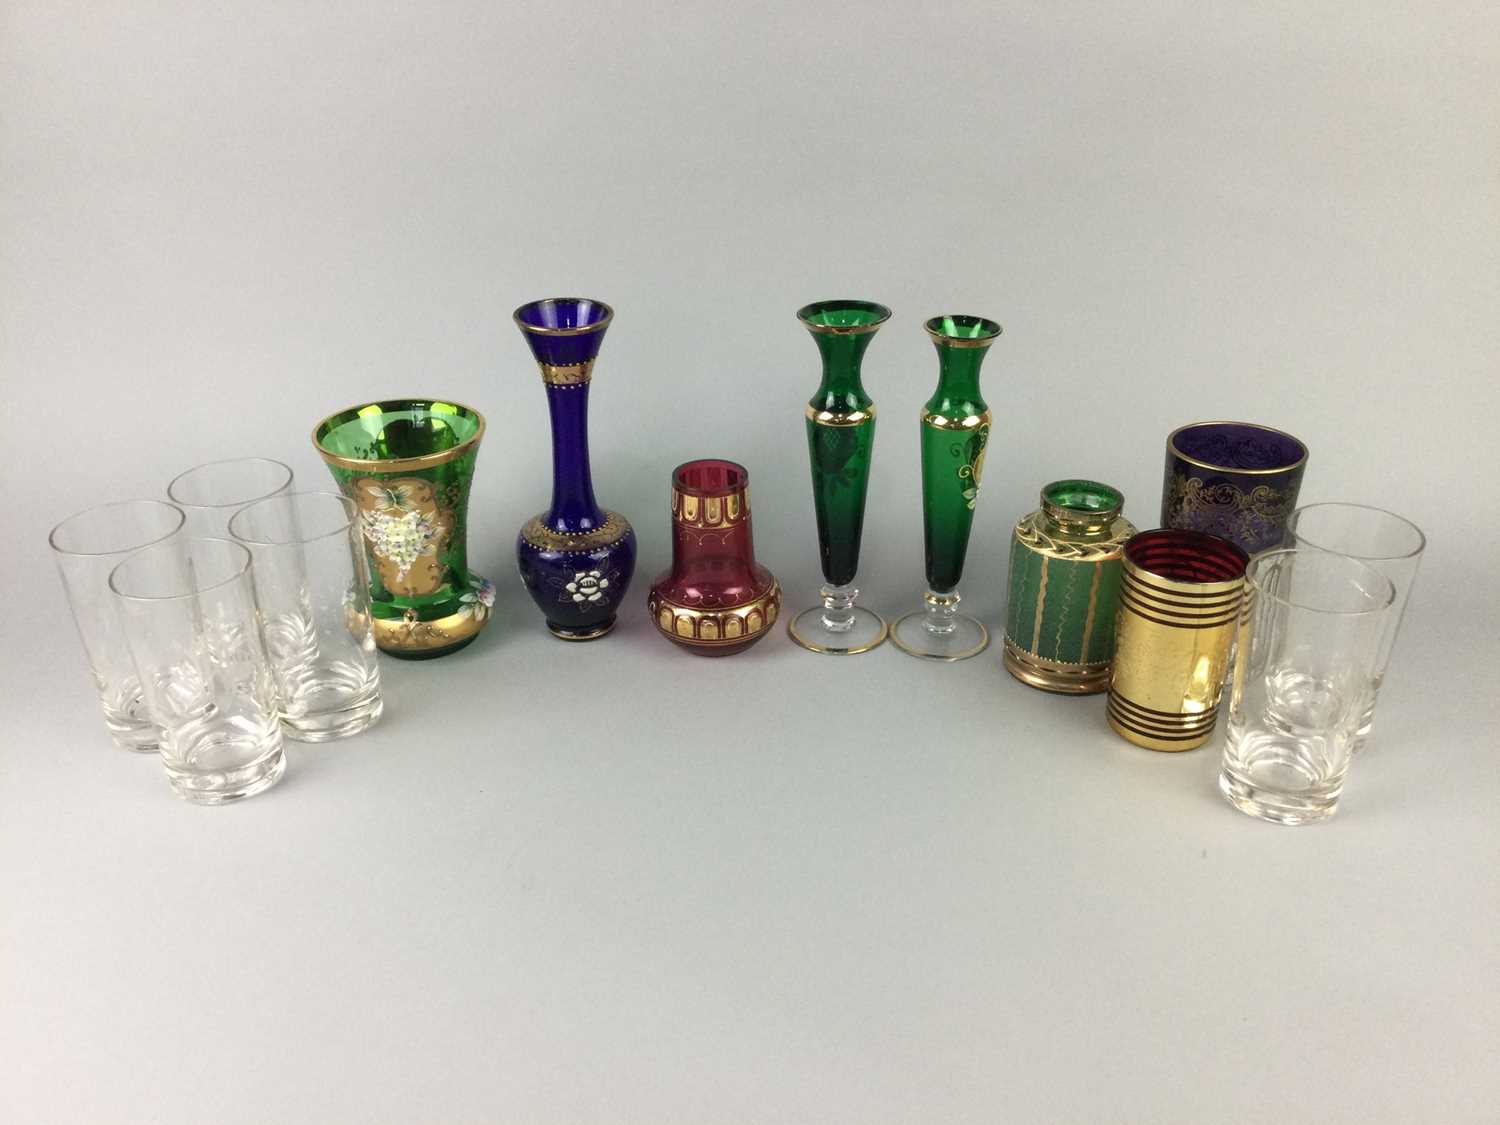 Lot 110 - A GLASS LEMONADE SET, ALONG WITH A COLLECTION OF COLOURED GLASS